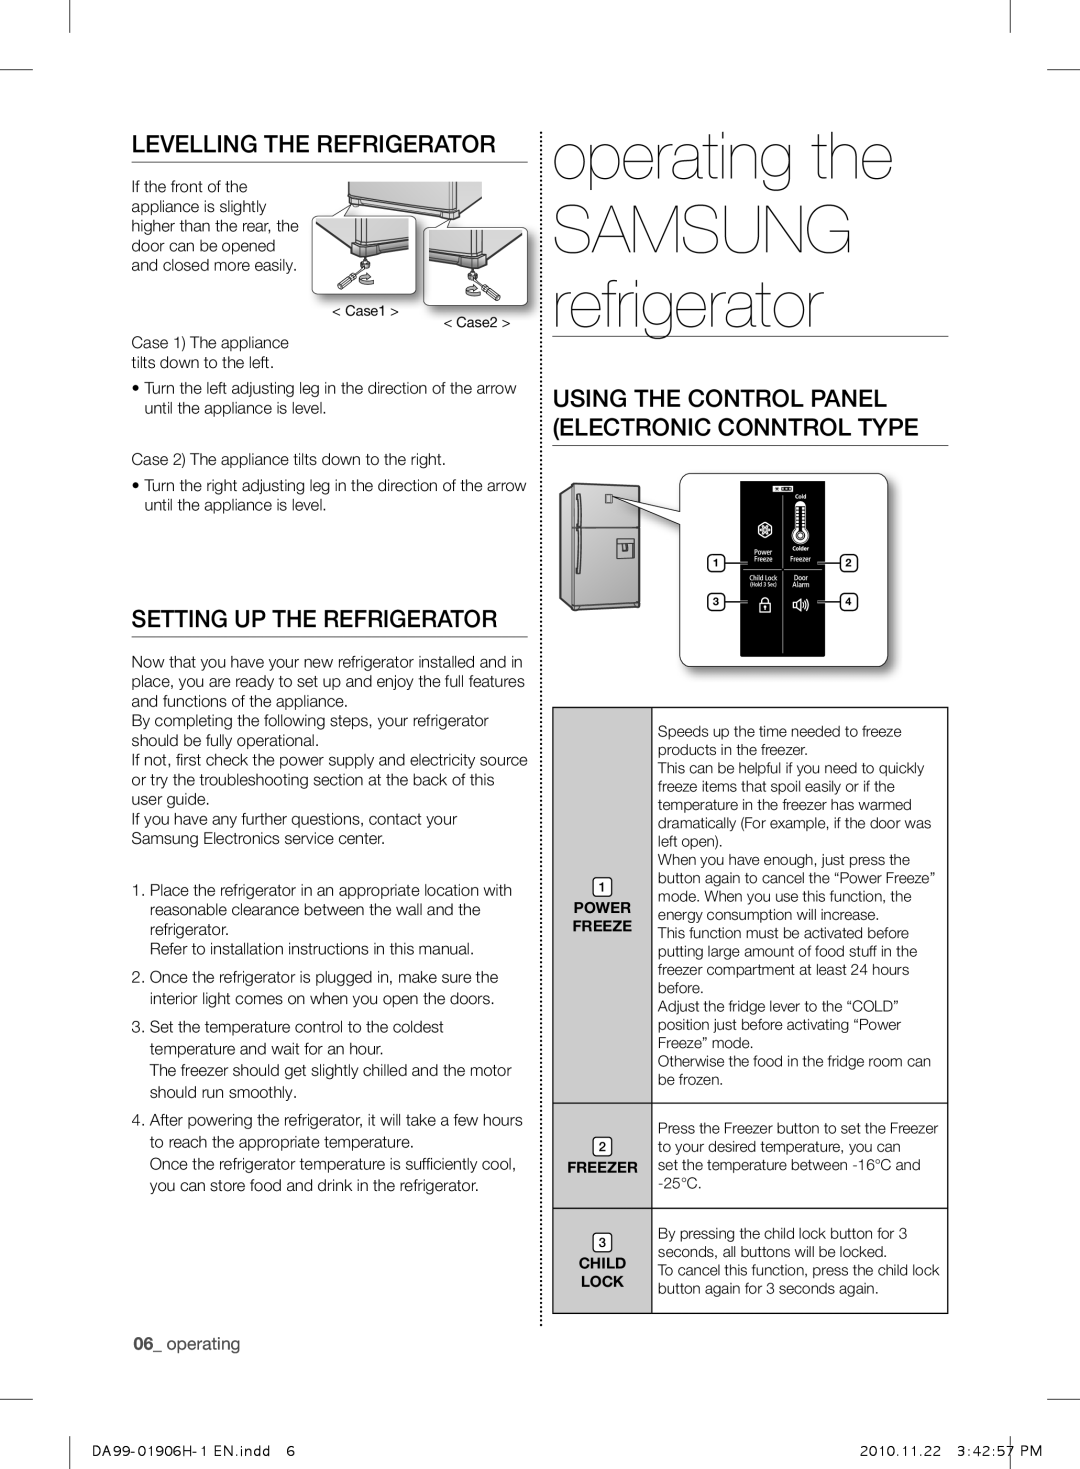 Samsung RT63PBPN1/XEF manual operating the, LEVELLing tHE rEfrigErator, sEtting uP tHE rEfrigErator, SAMSUNG refrigerator 